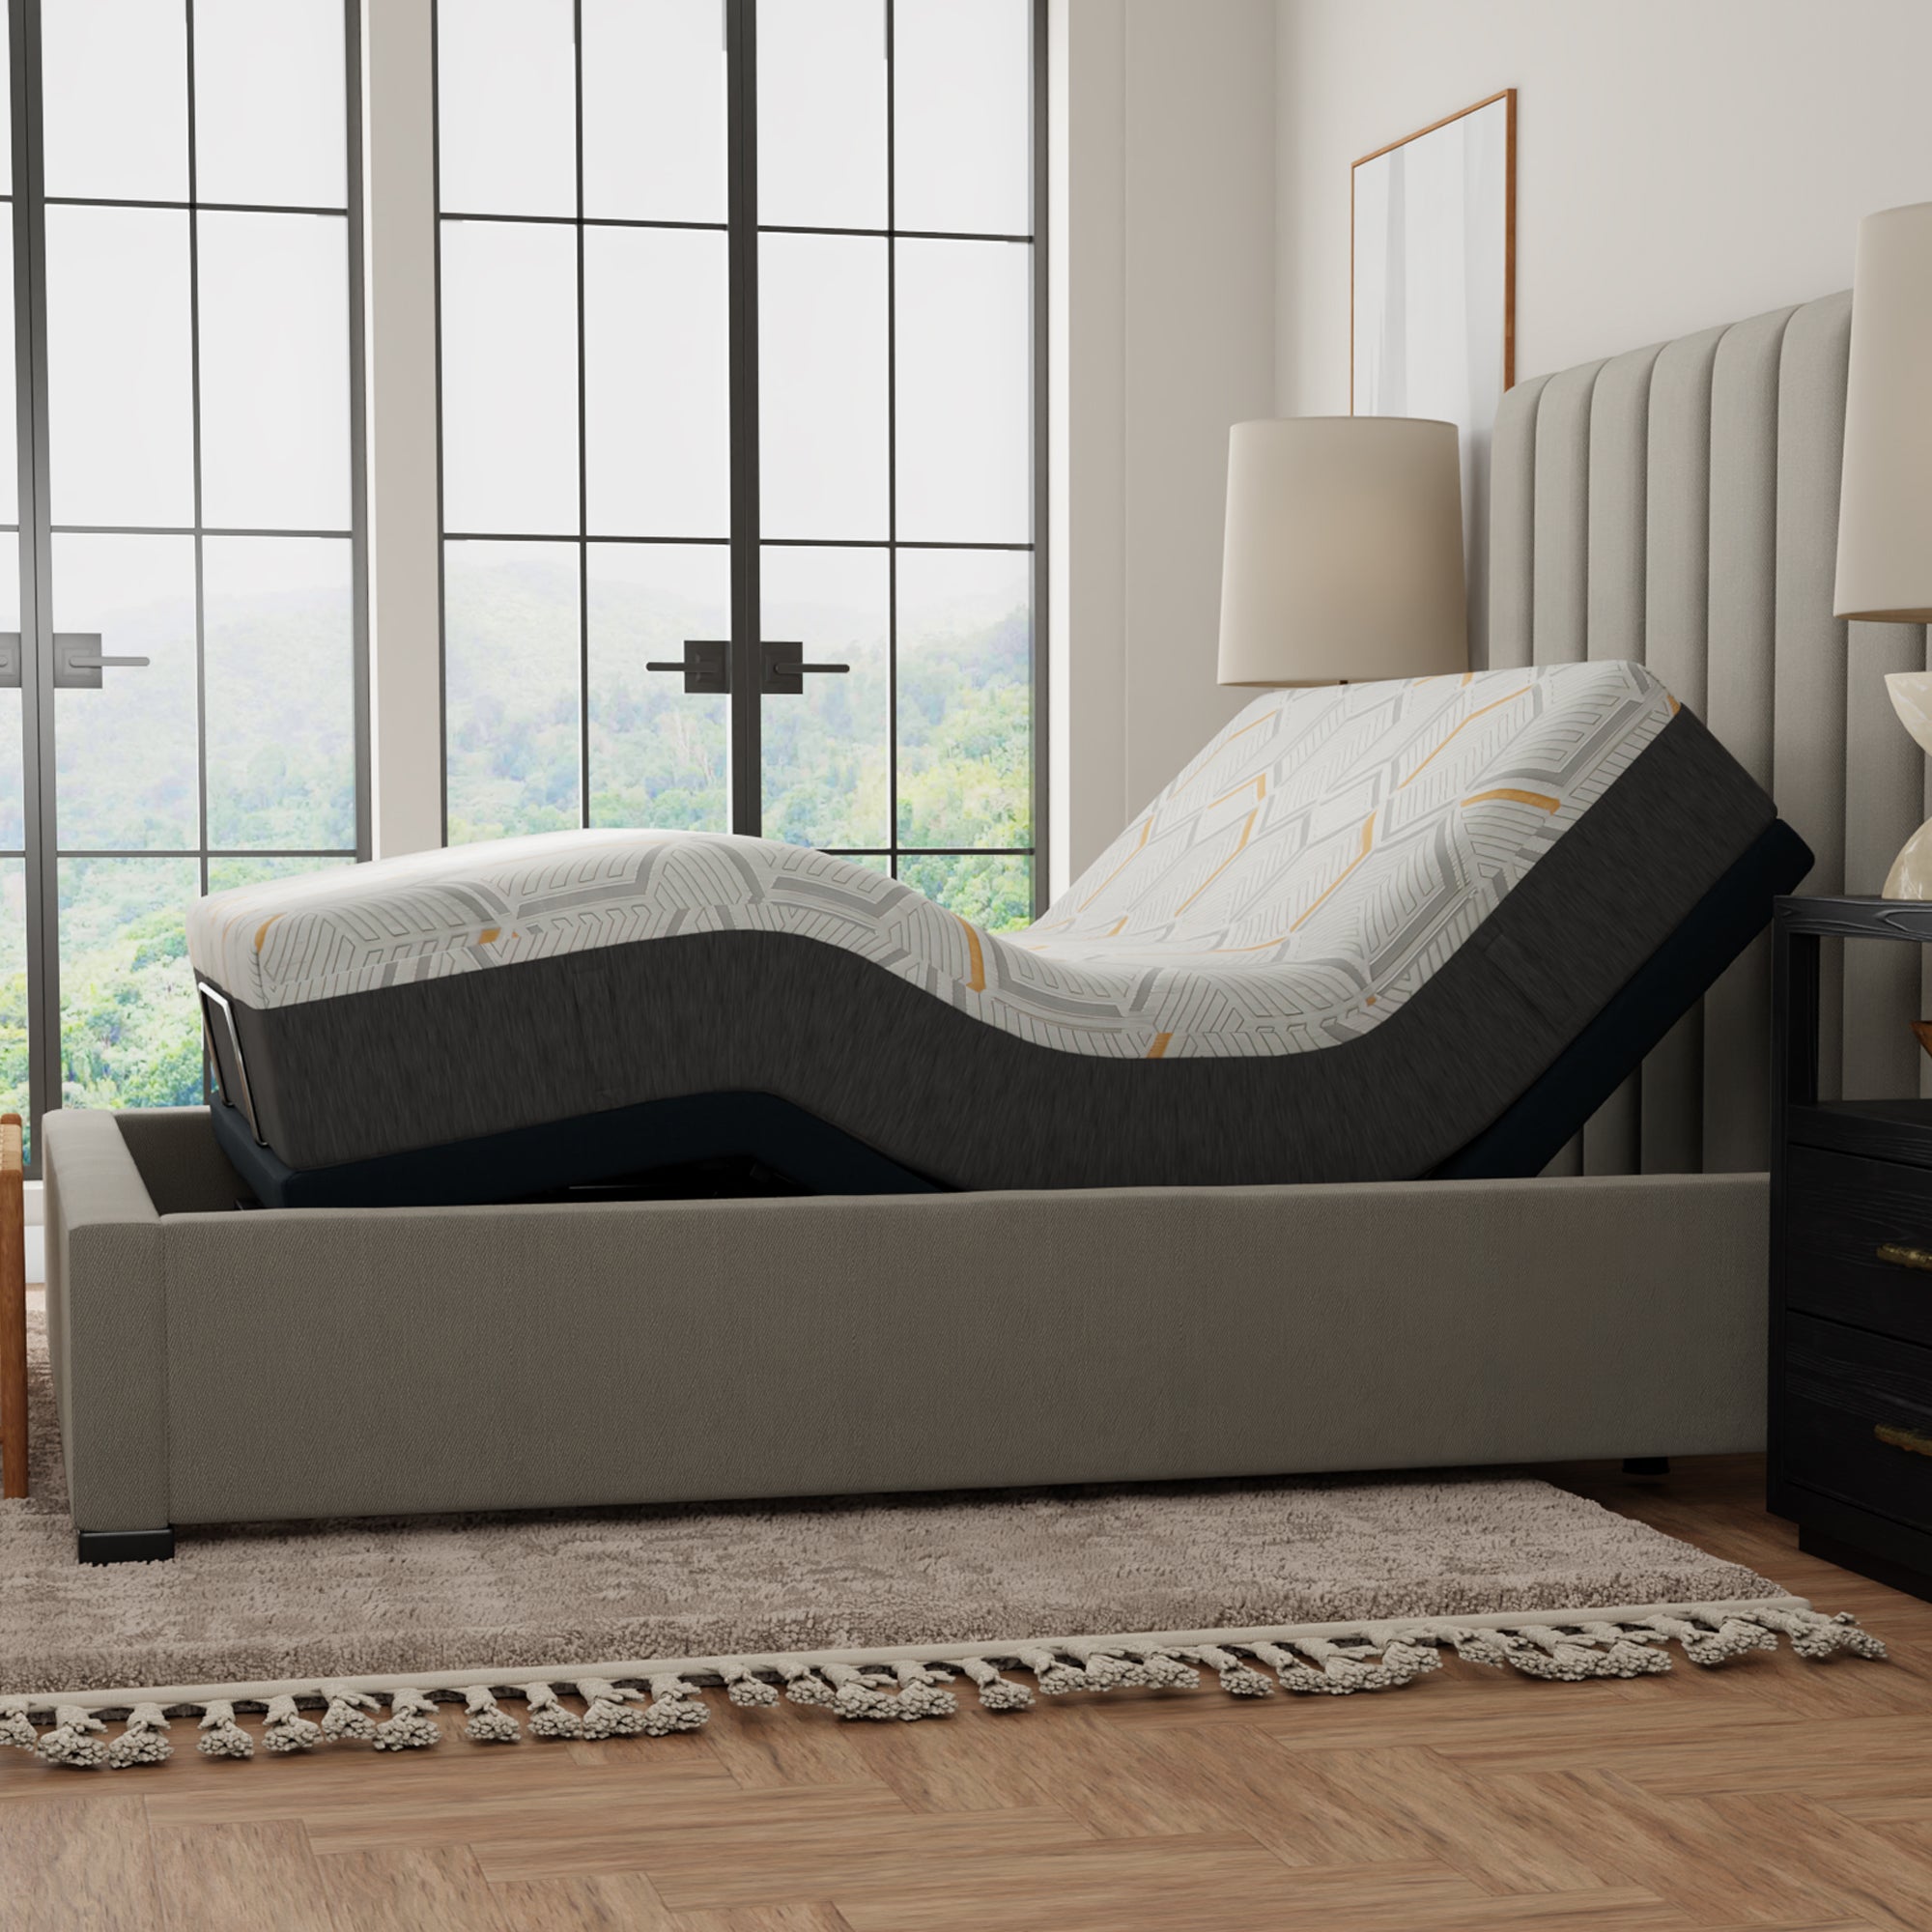 Blissful Nights Sleep System: 12” Copper Infused Cool Memory Foam Mattress,  Medium-Firm with e3 Adjustable Base - BlissfulNights.com